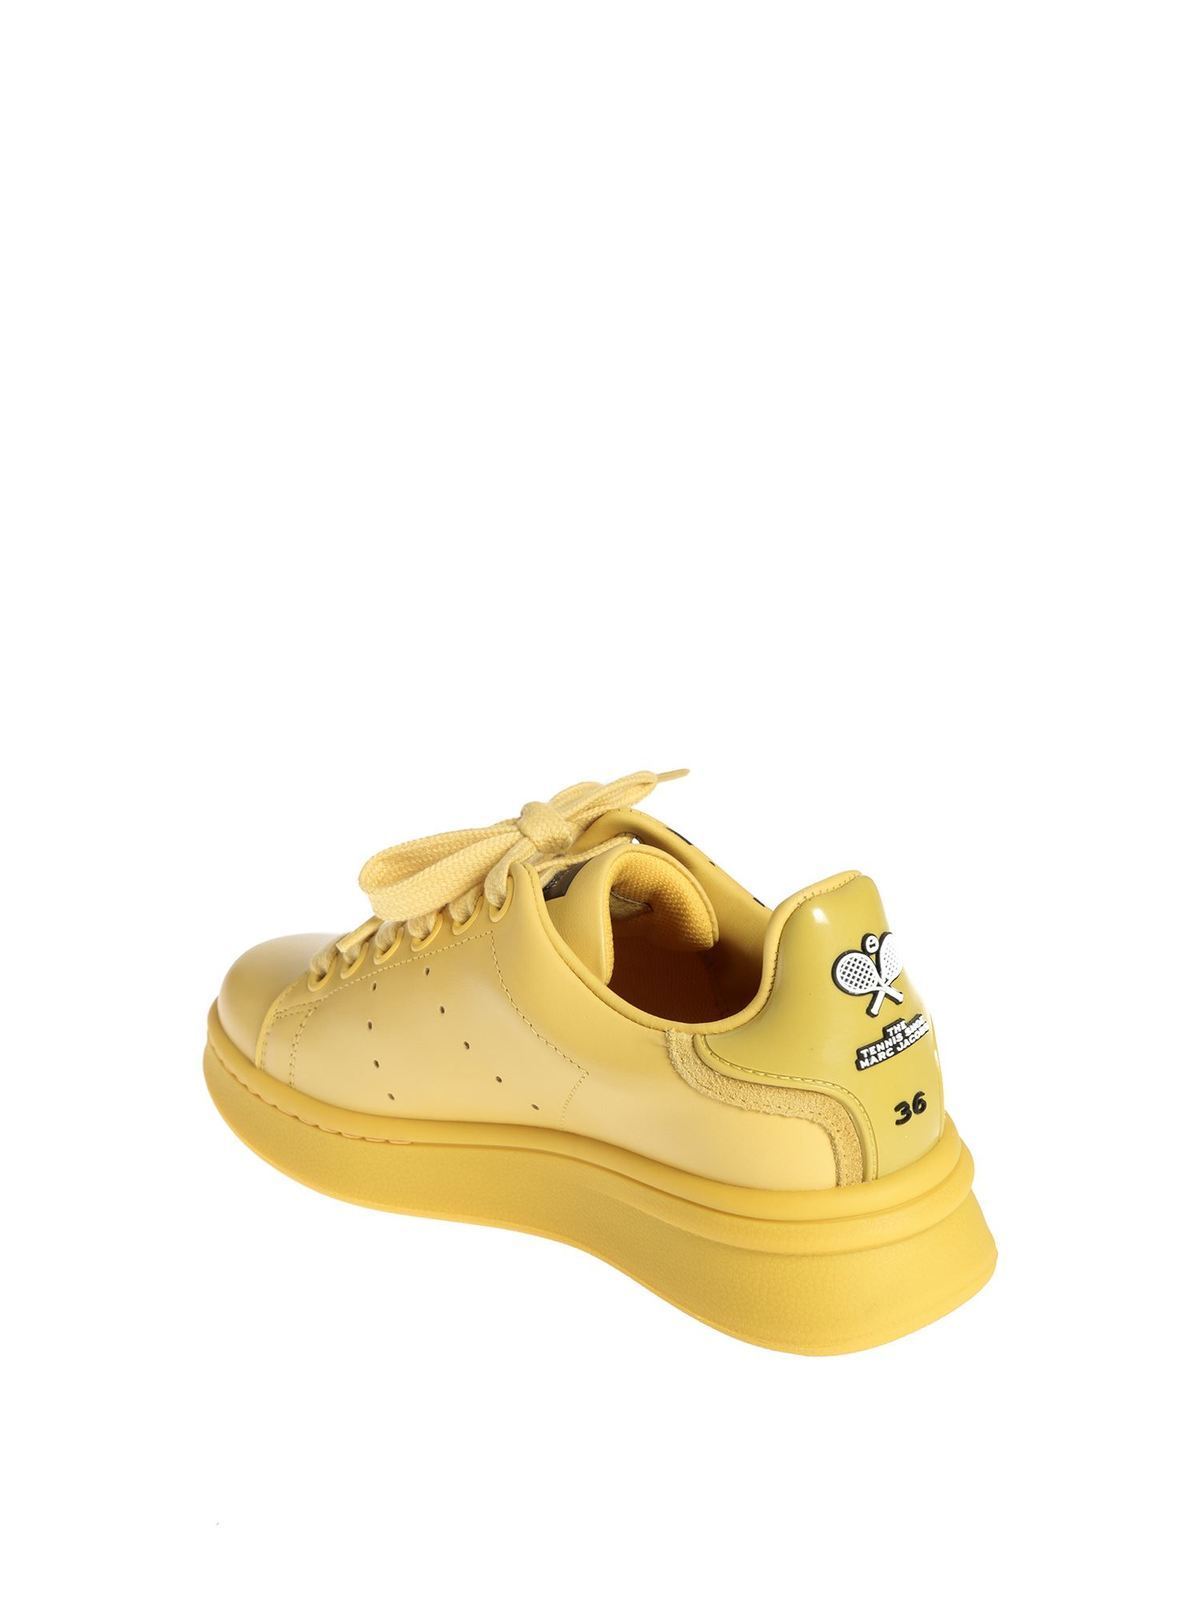 Trainers Marc Jacobs - Peanuts x The Tennis Shoe in yellow